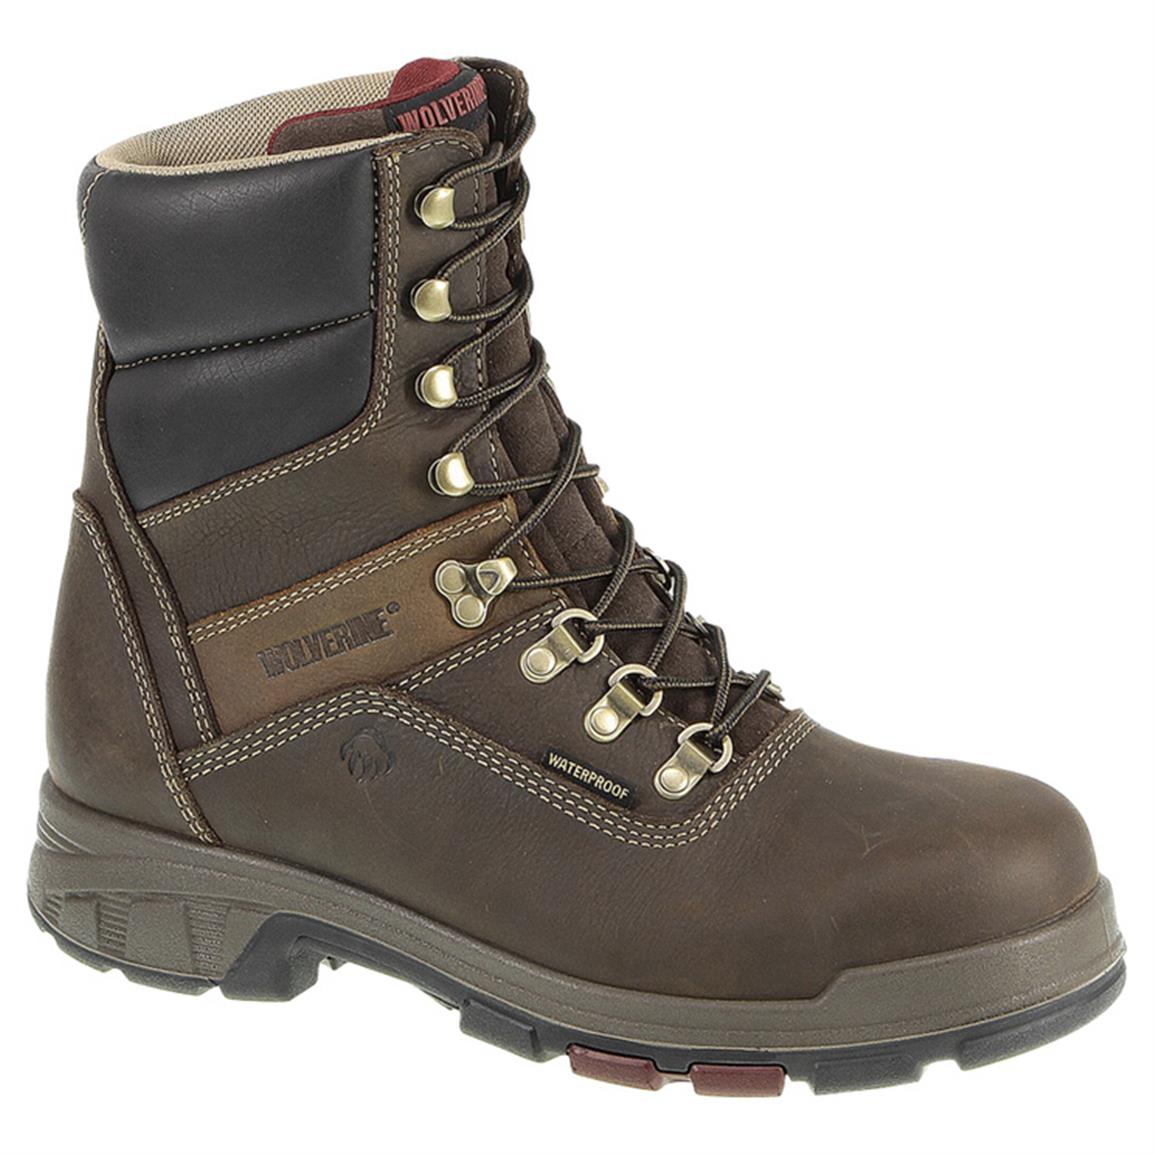 Men's Wolverine® 8" Cabor EPX Waterproof Work Boots ...